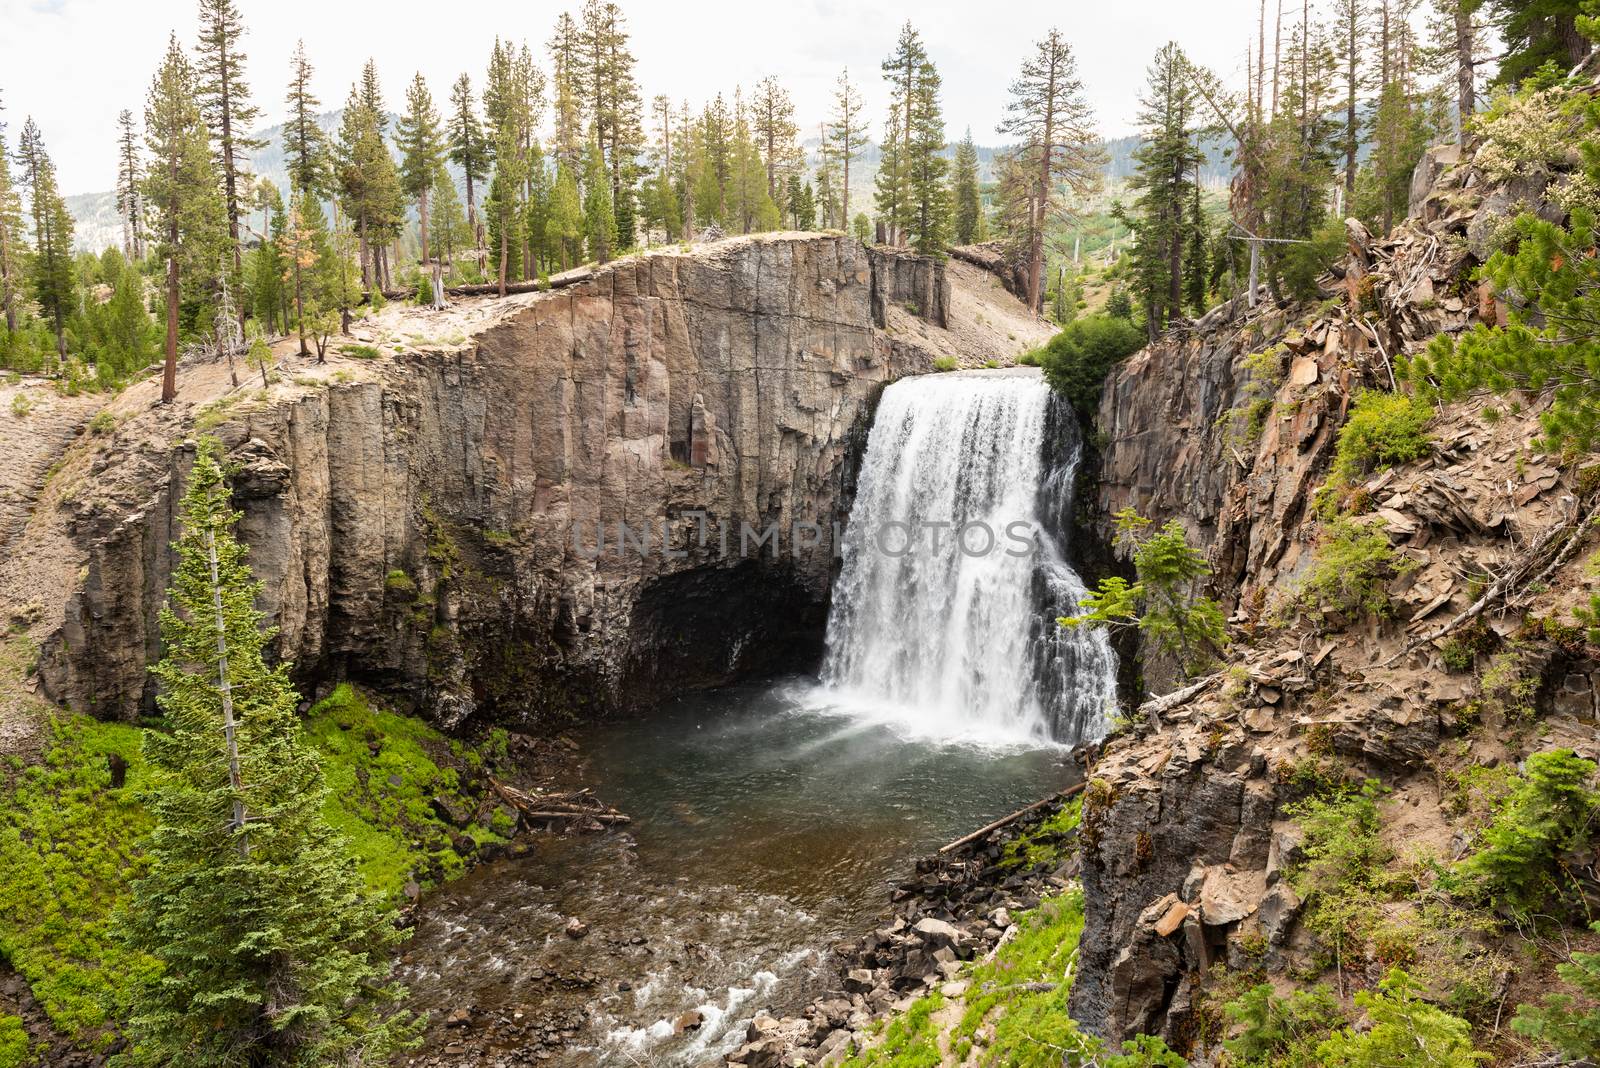 Rainbow Falls in Devils Postpile National Monument, Ansel Adams Wilderness, Inyo National Forest, California by Njean